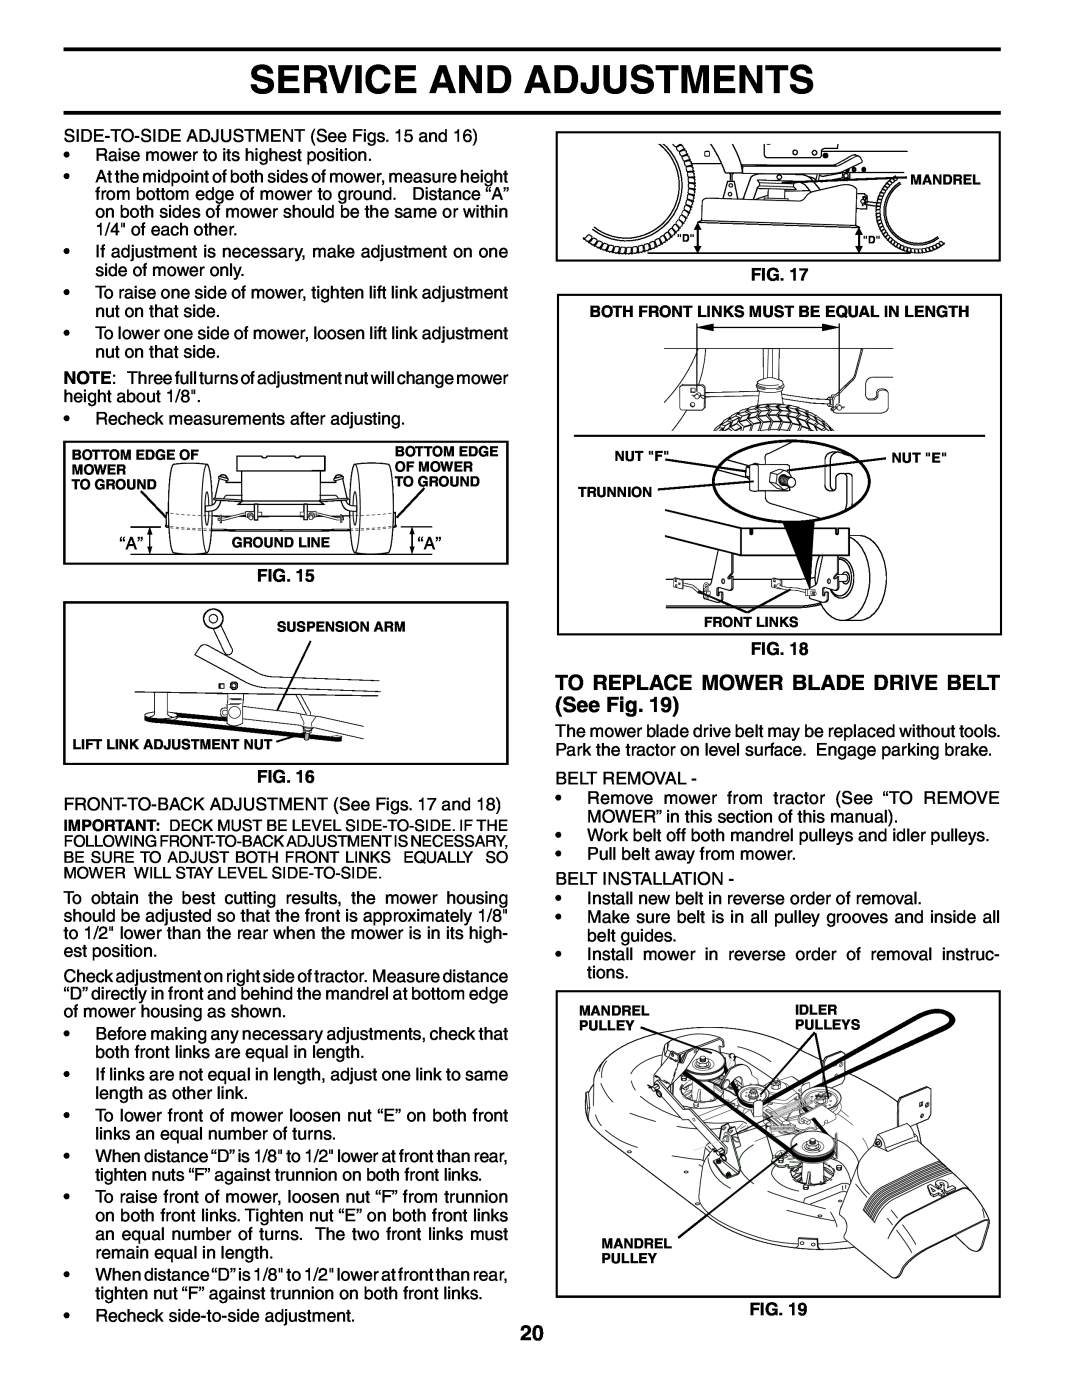 Poulan HD21H42 manual TO REPLACE MOWER BLADE DRIVE BELT See Fig, Service And Adjustments 